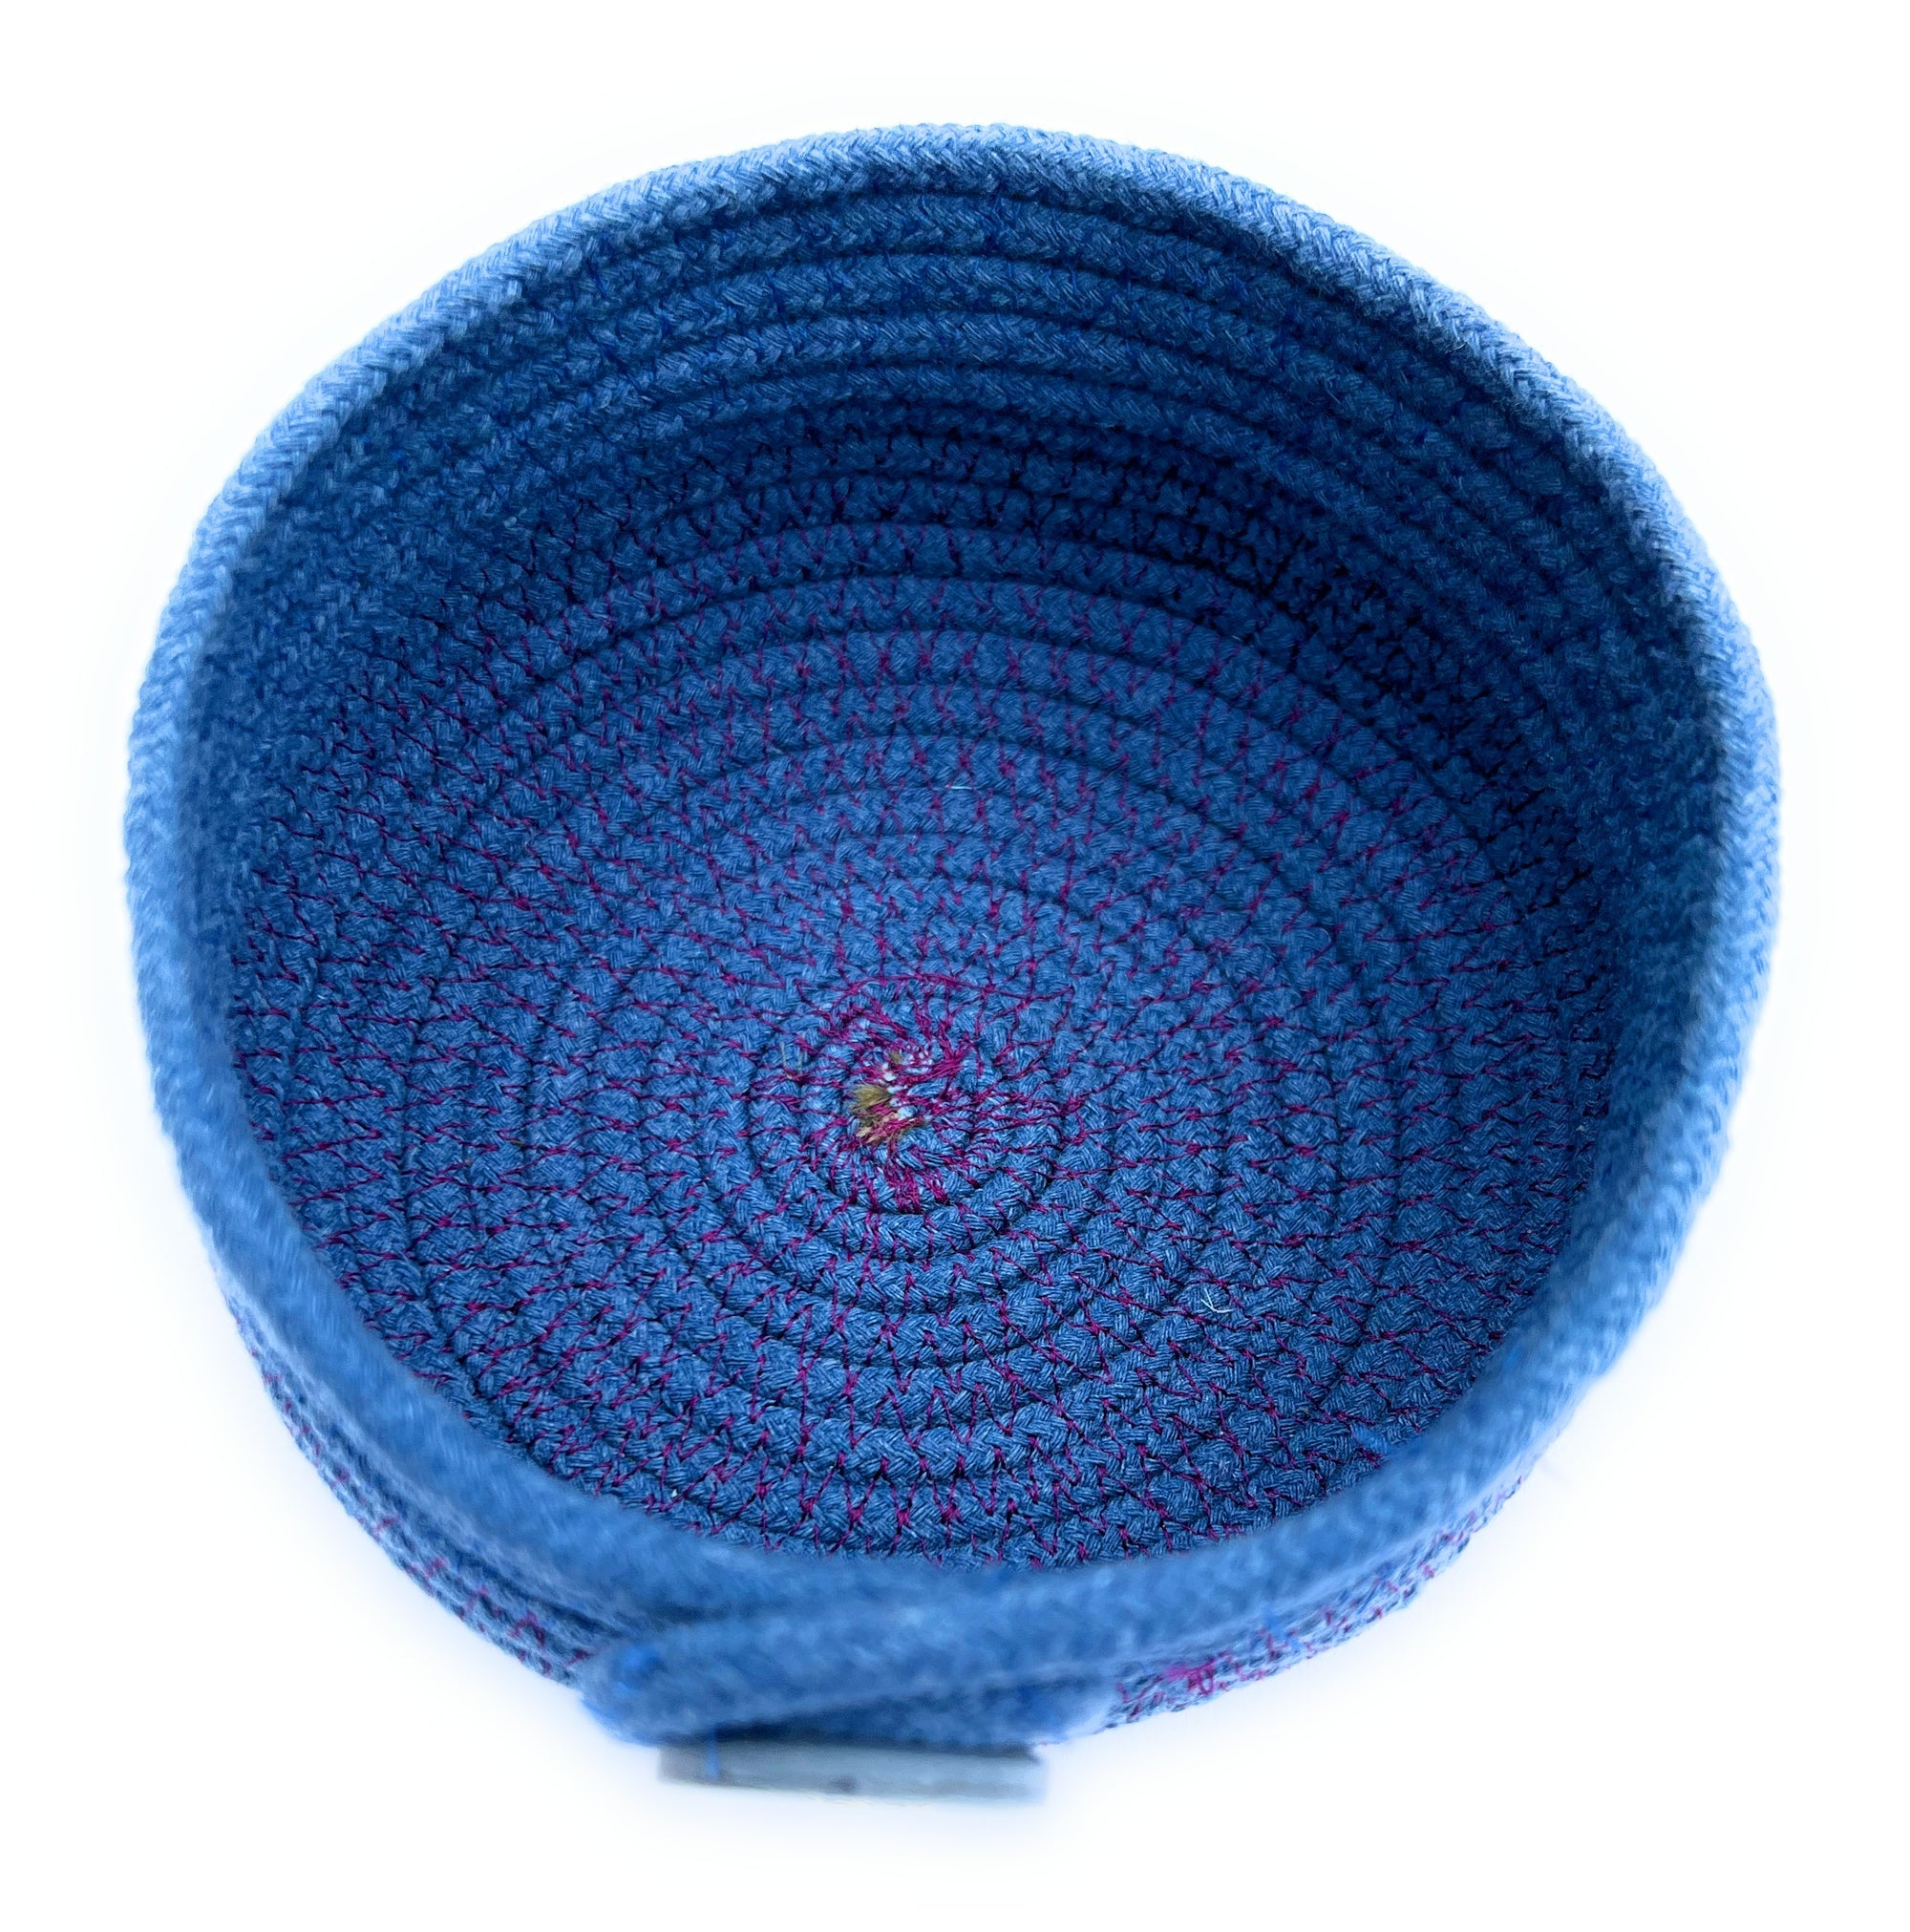 Coiled Rope Bowl in Blue with Silver Bead Accent